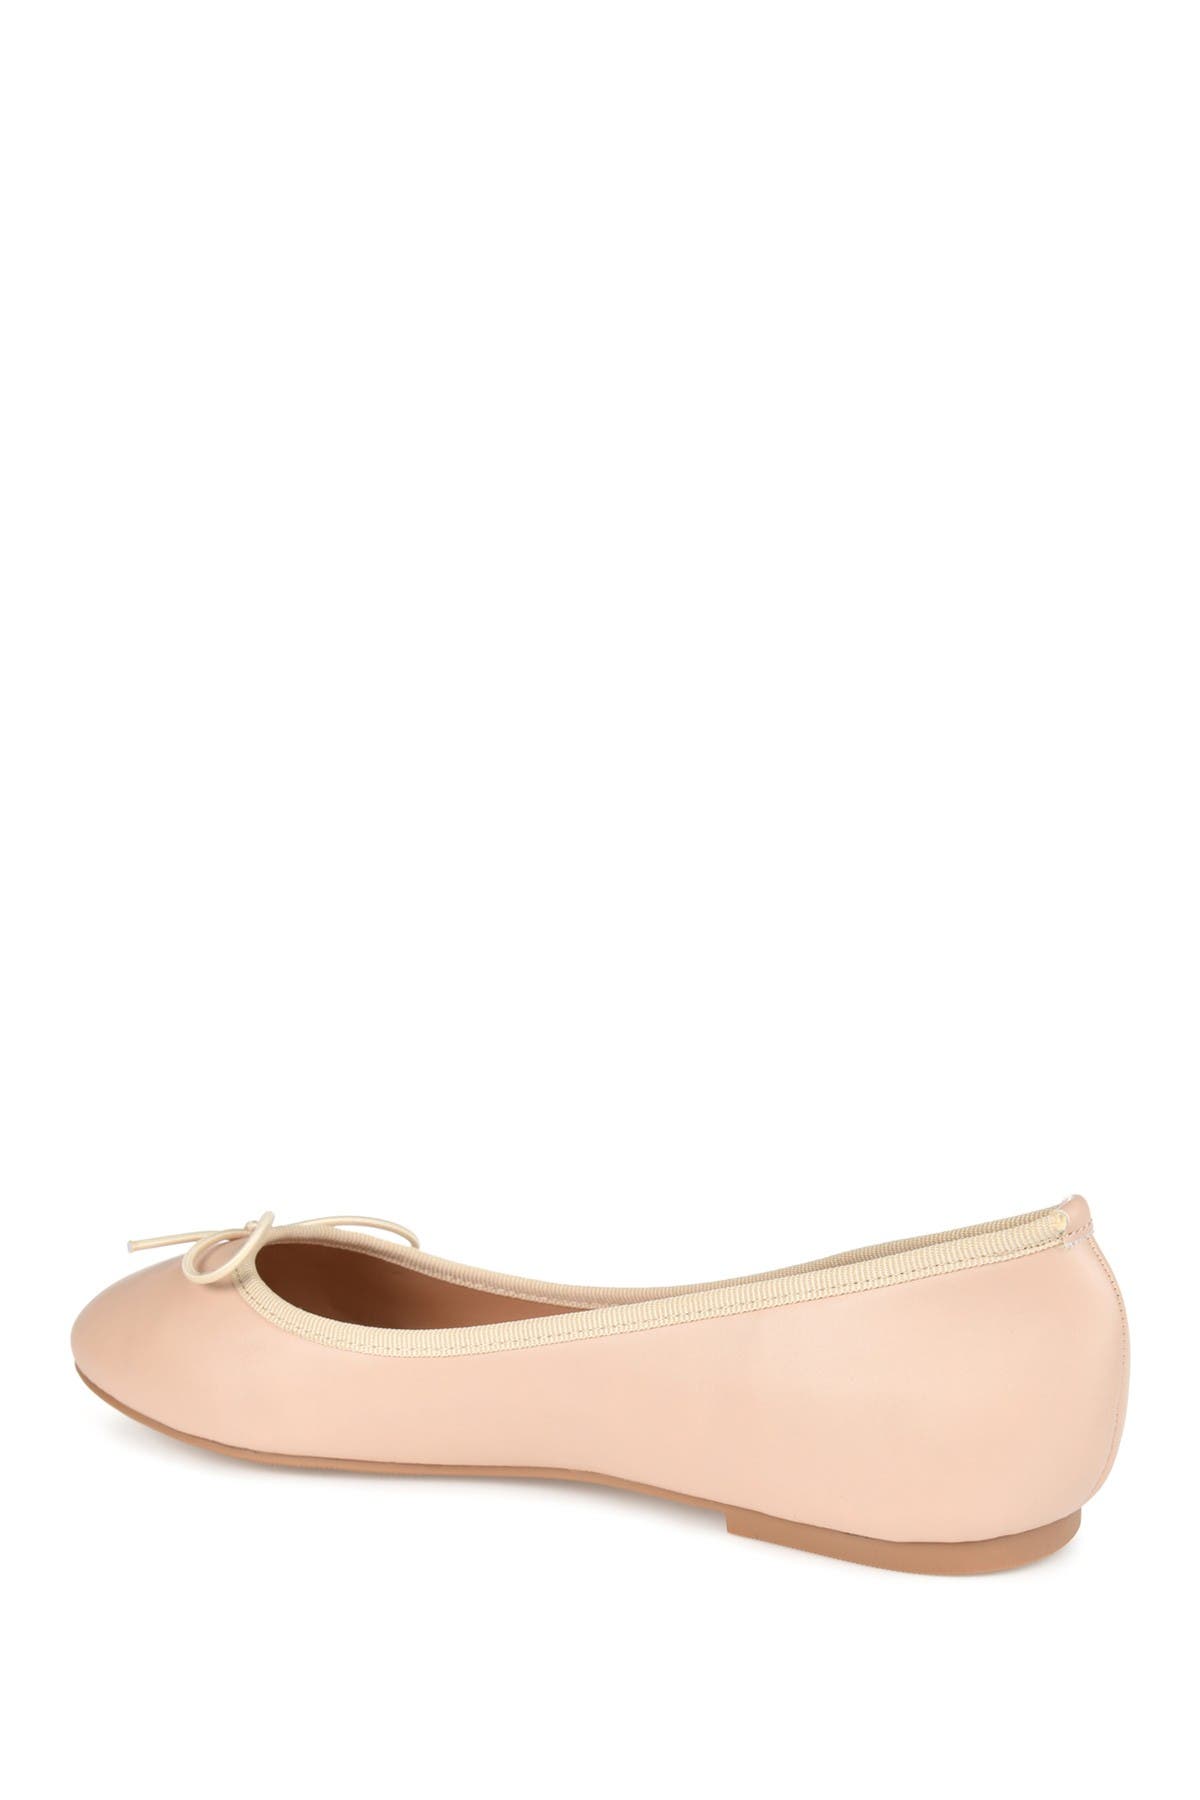 Journee Collection Vika Bow Flat In Light/pastel Pink